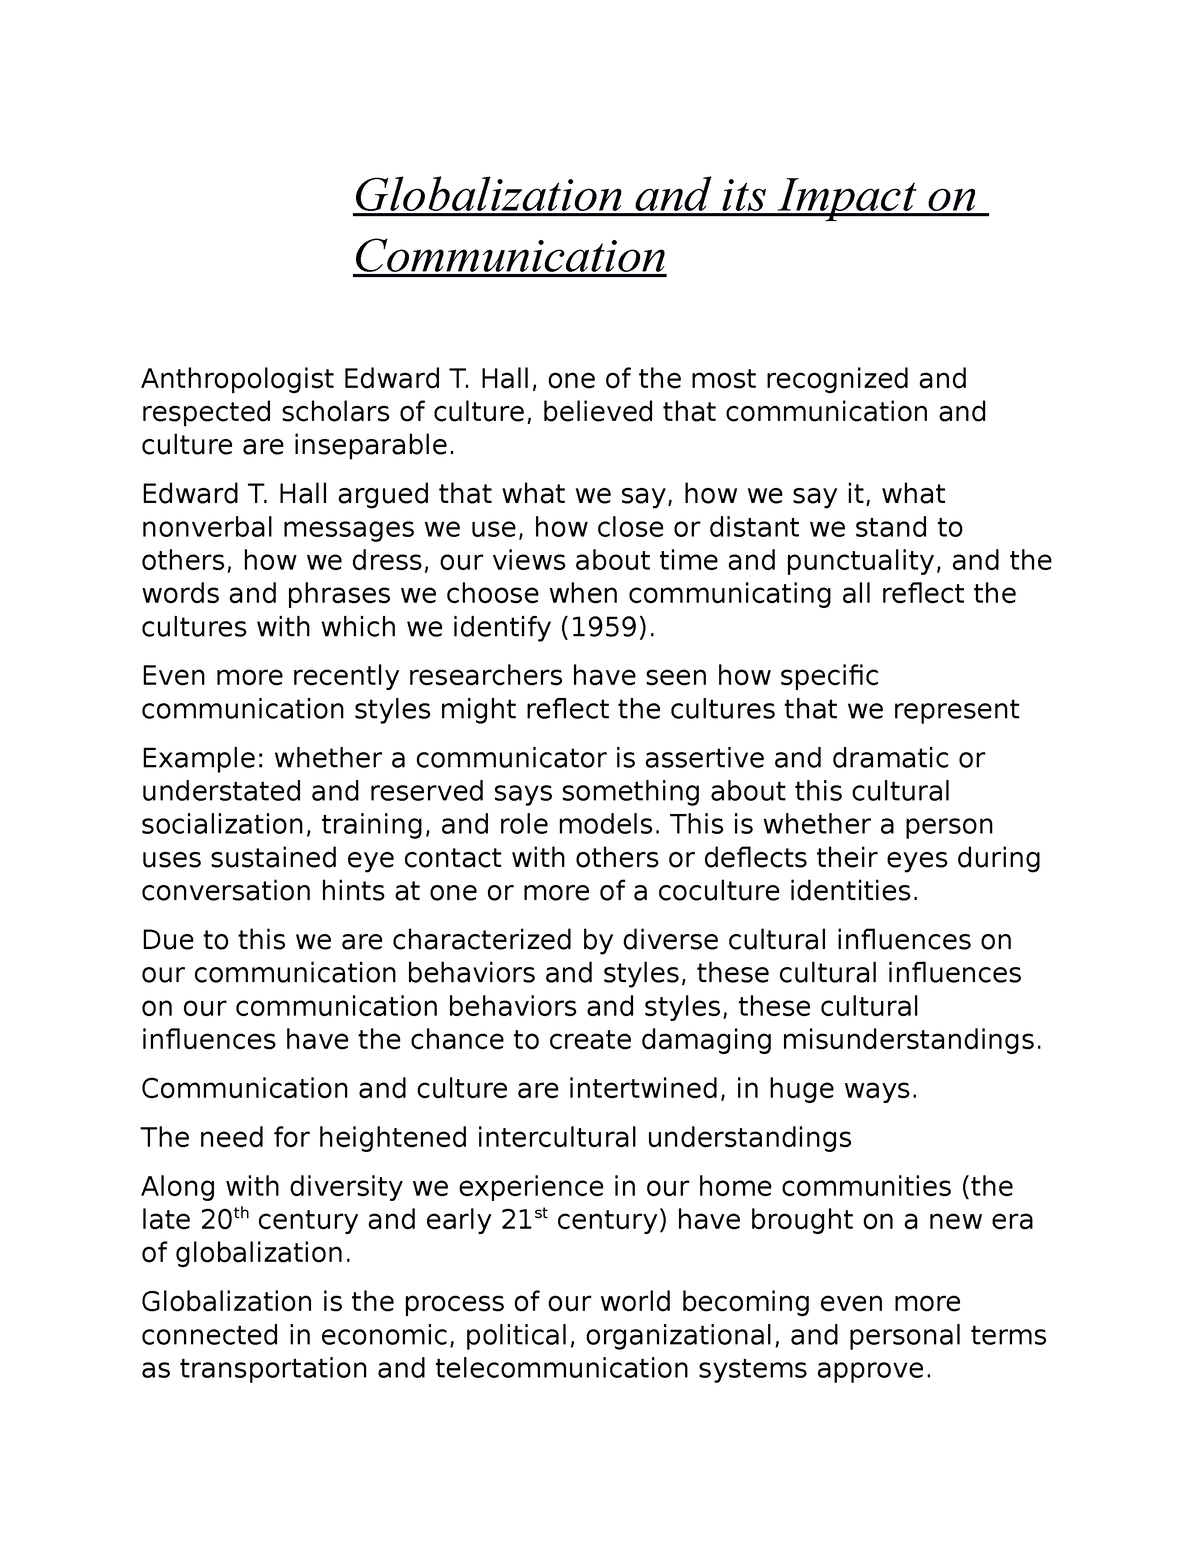 impact of globalization on communication research paper